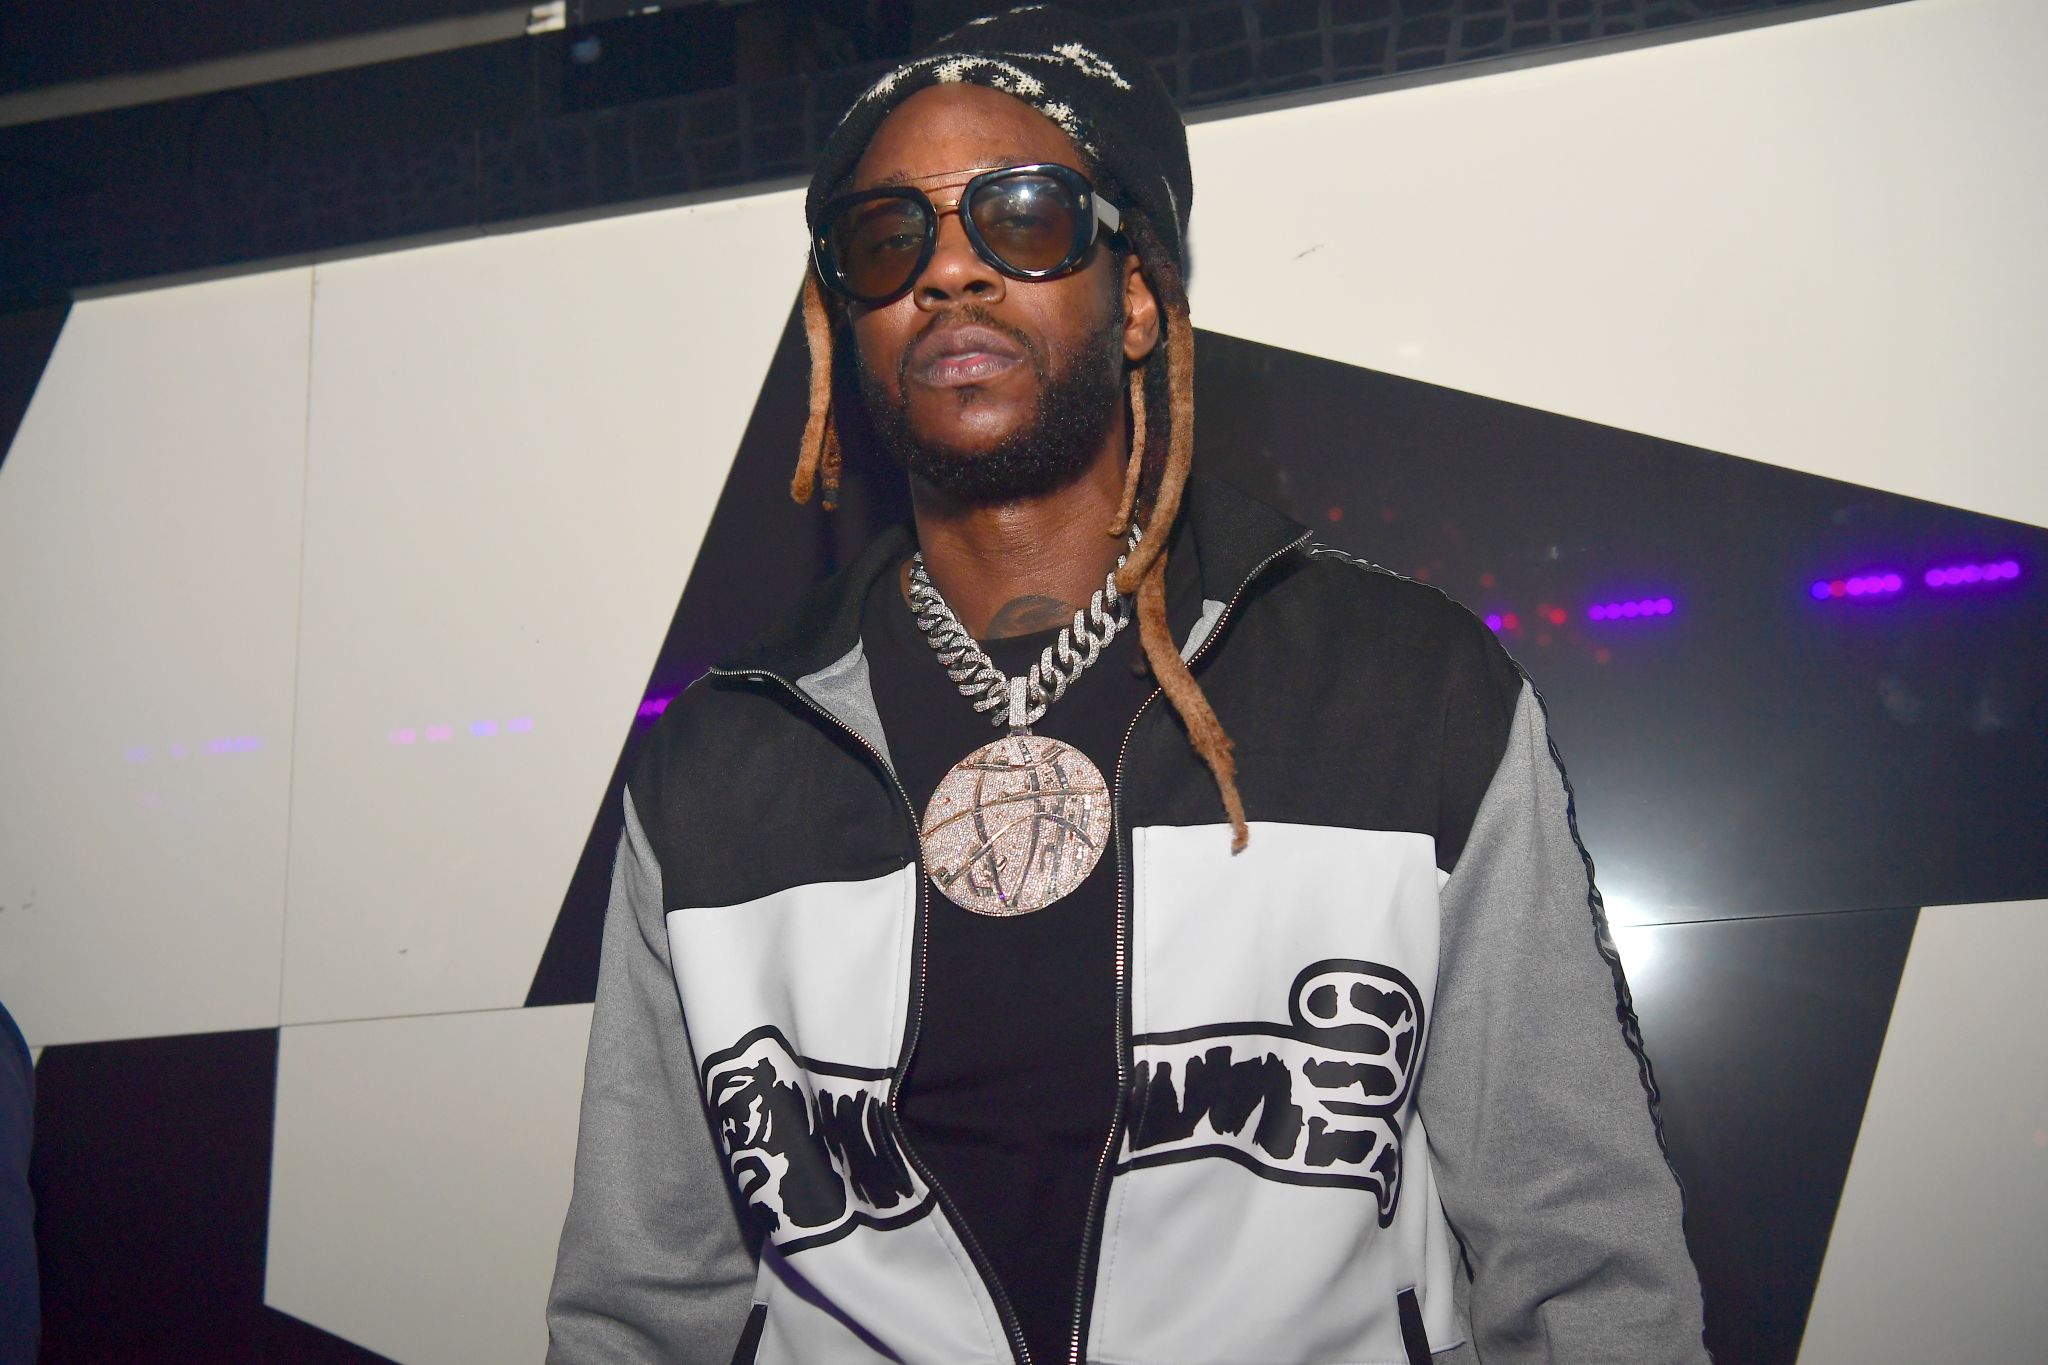 2 Chainz Releases The First Episode Of His Youtube Show ‘Money Maker